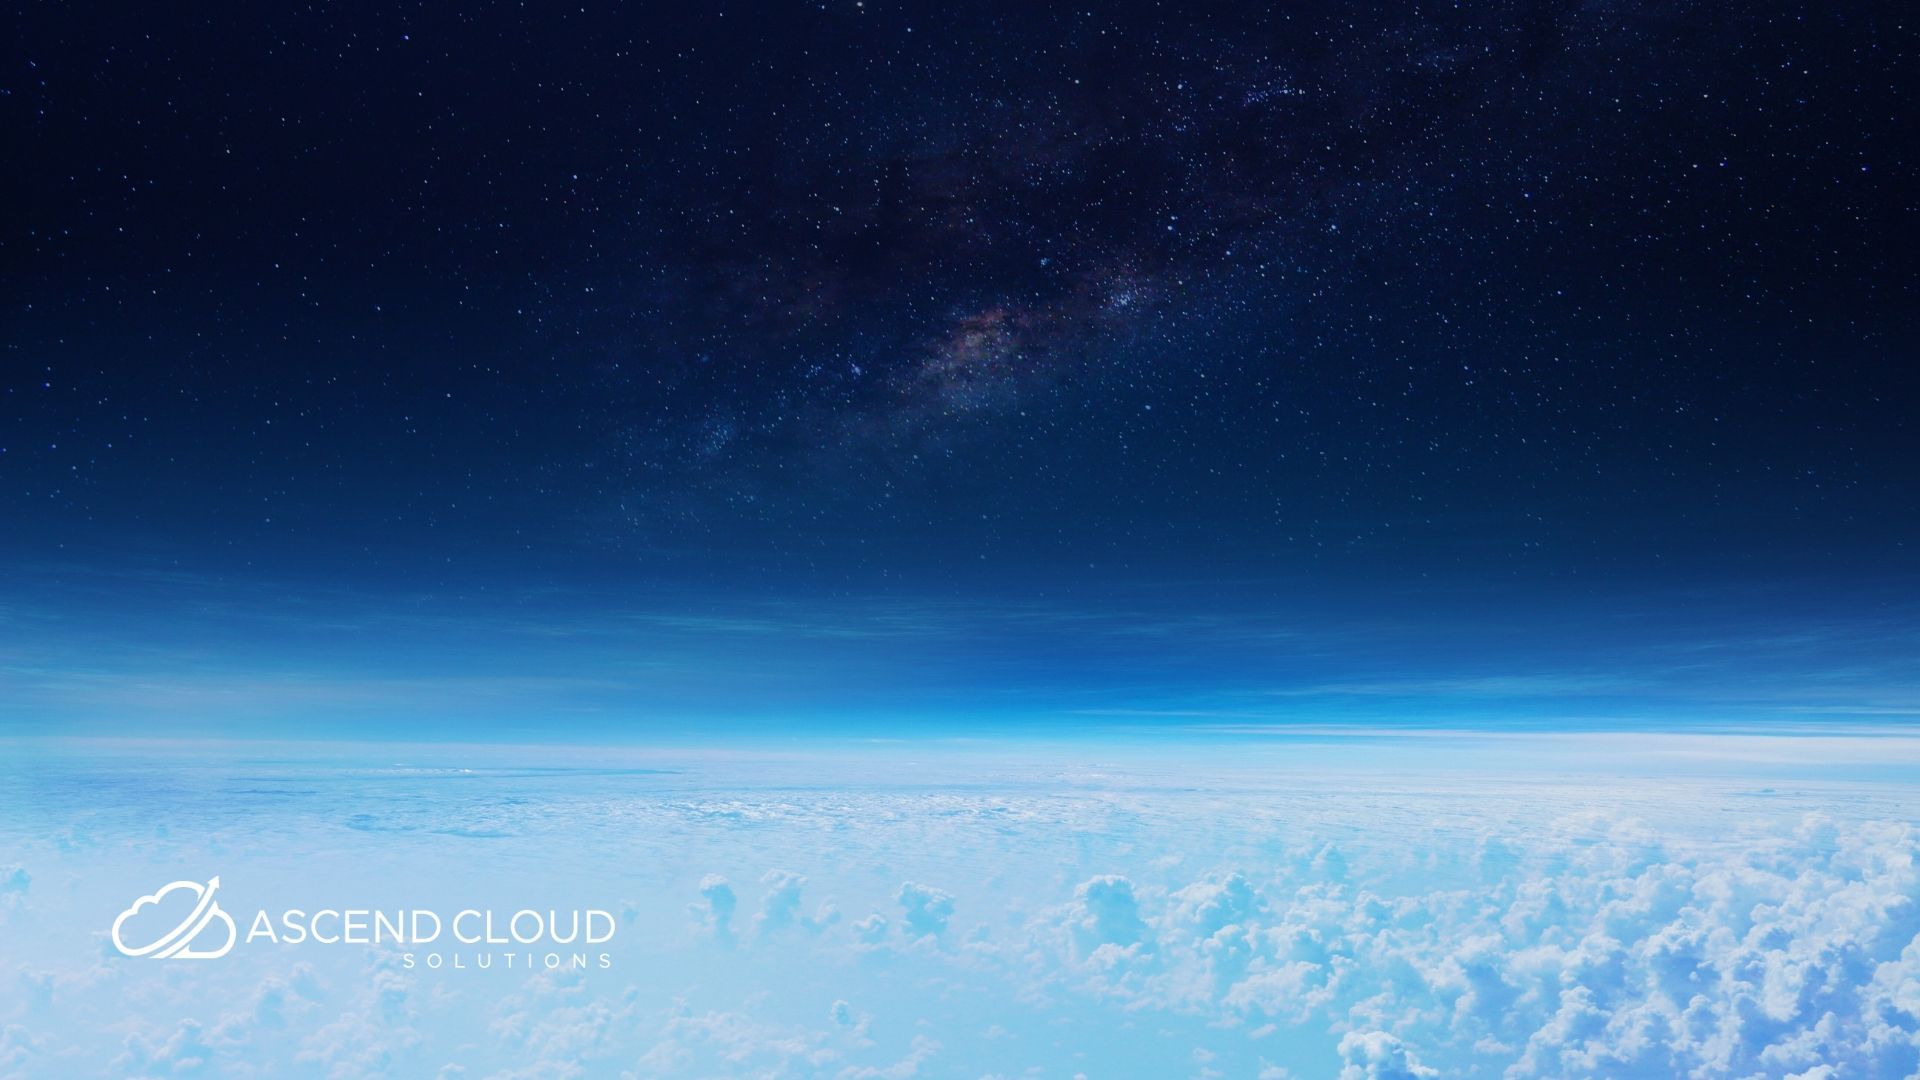 Cloud computing has had a huge impact on data and software accessibility in many industries. But can it be used in space travel? Find out in our article.